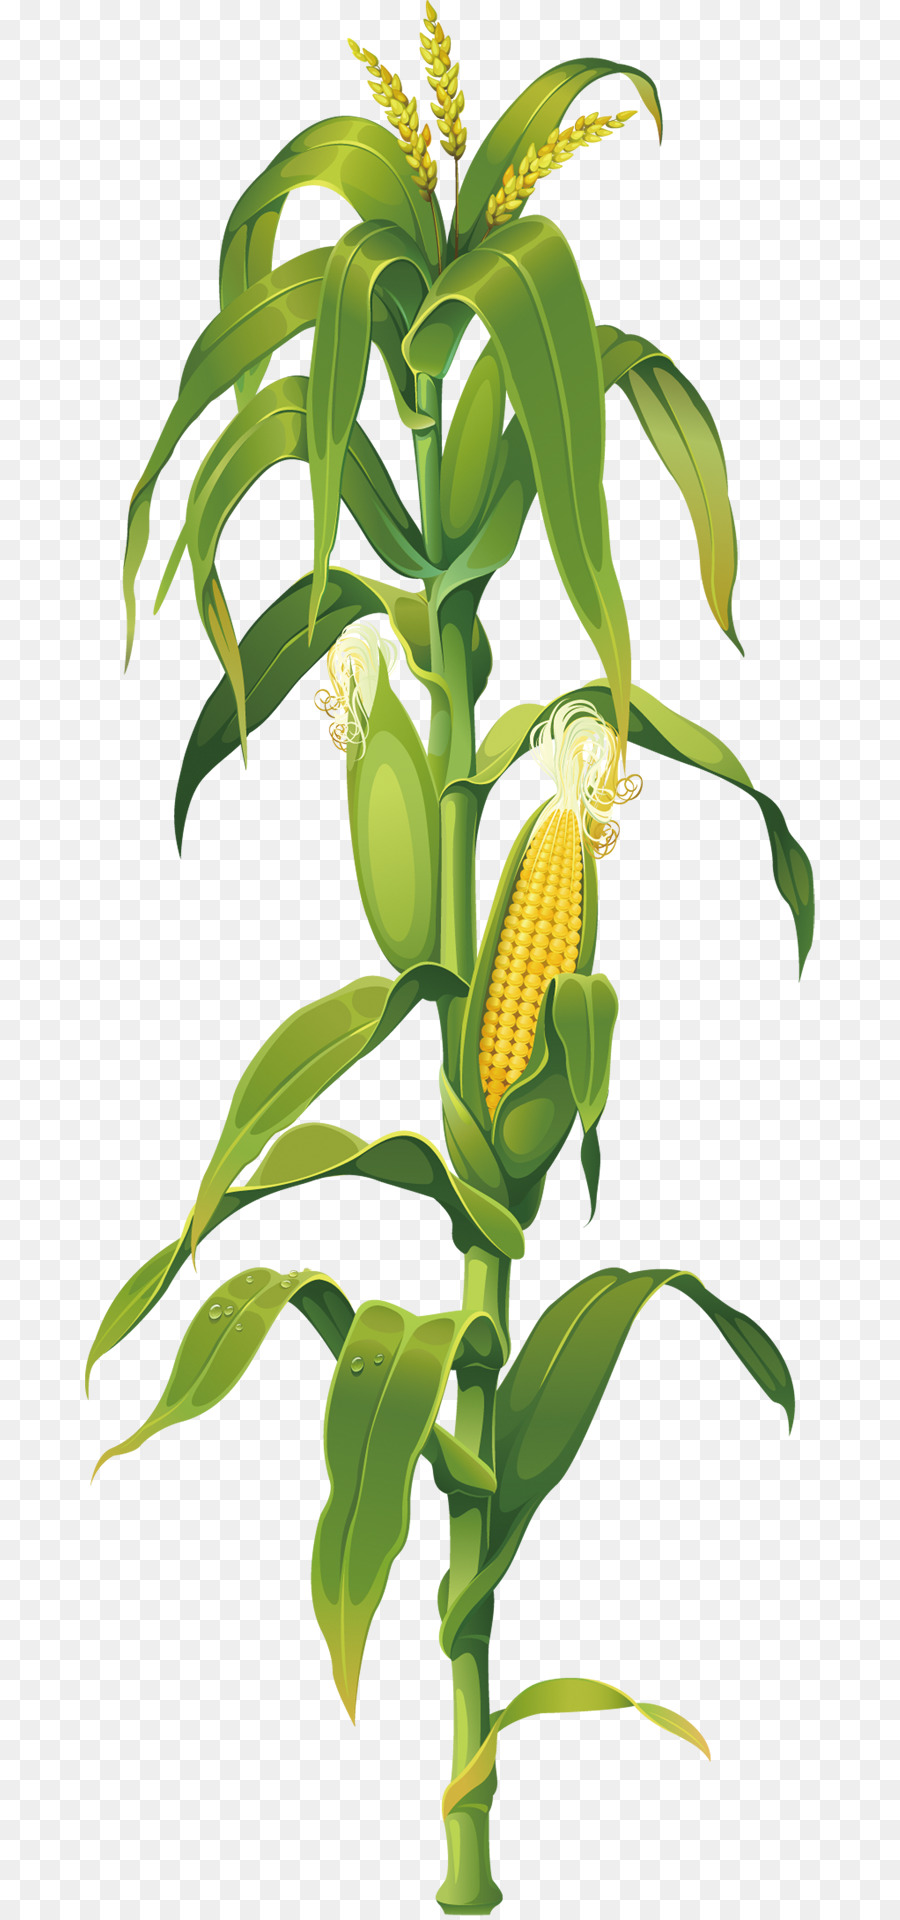 Maize Corn on the cob Drawing Plant Clip art - corn png download - 730*1916 - Free Transparent Maize png Download.